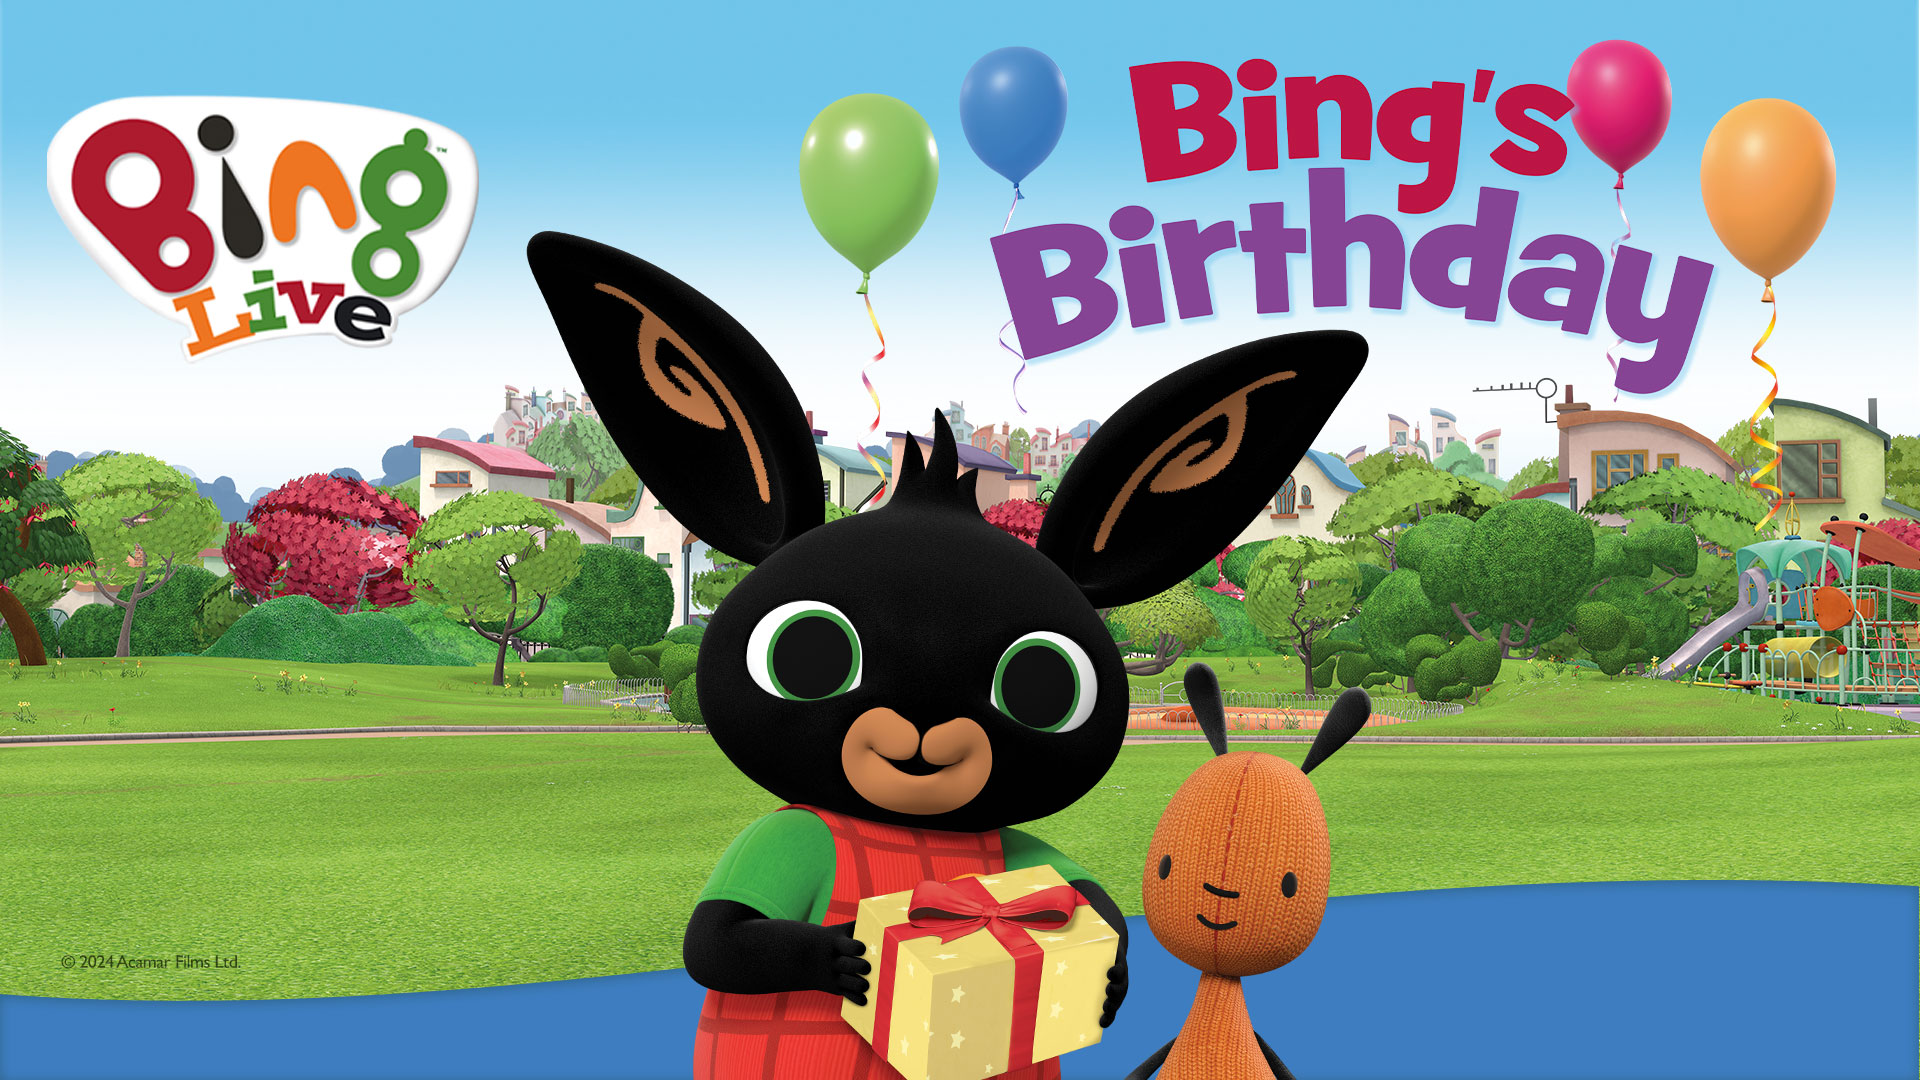 Children's TV characters Bing and Flop stood in front of a park with balloons for Bing's Birthday.